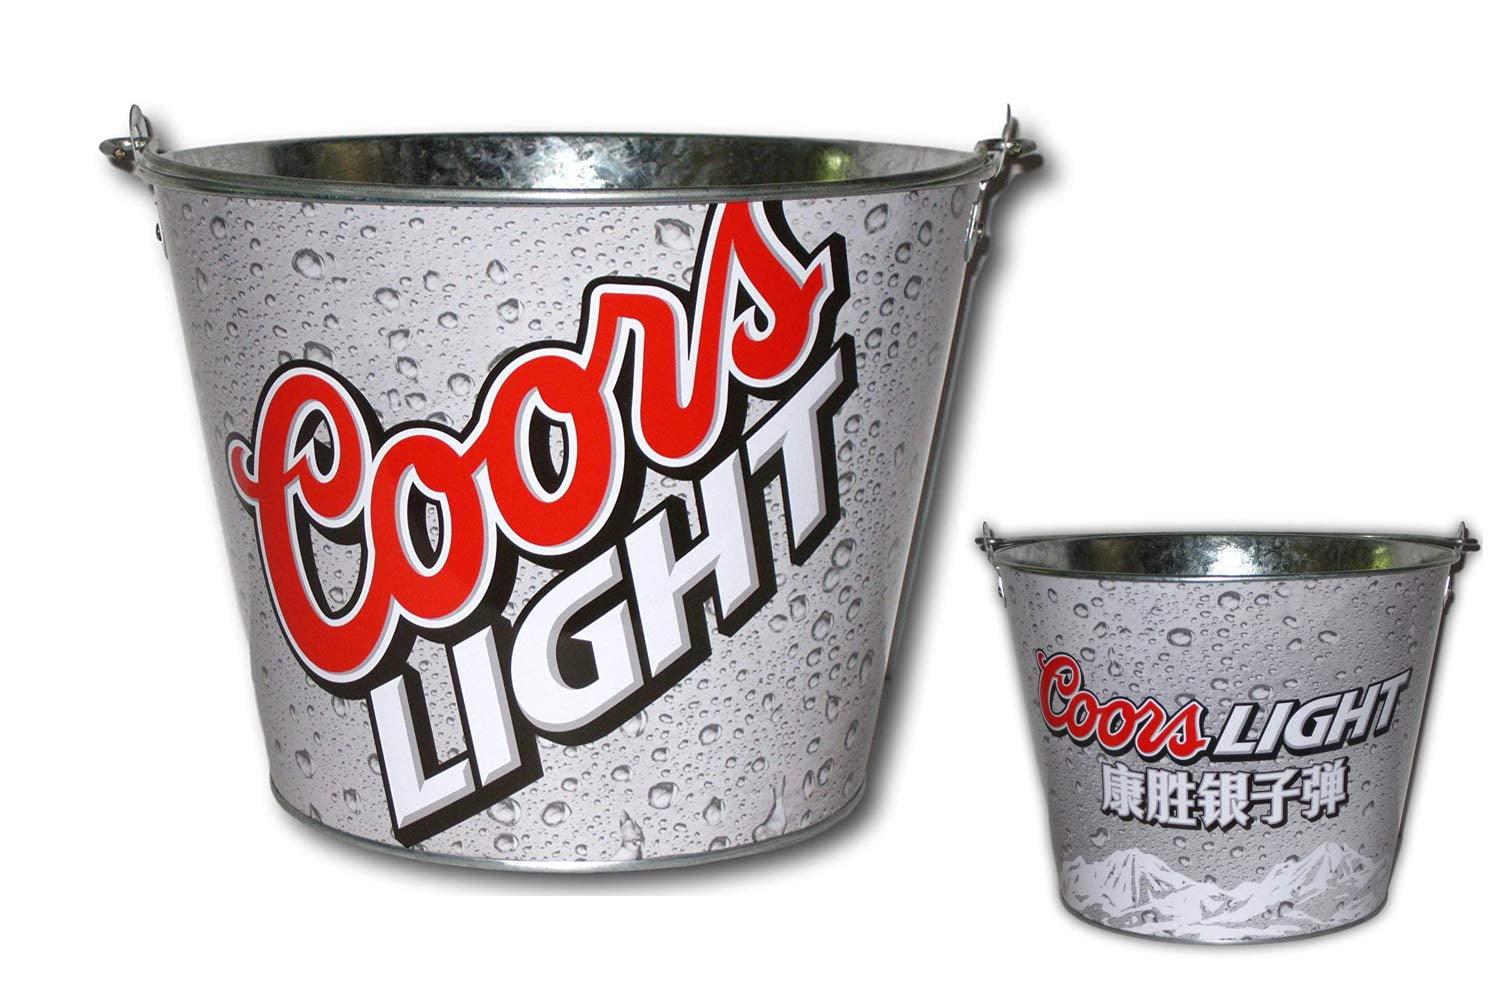 Coors Light New York Giants 5 Quart Ice Bucket Set of Two 2 New & Free Ship 